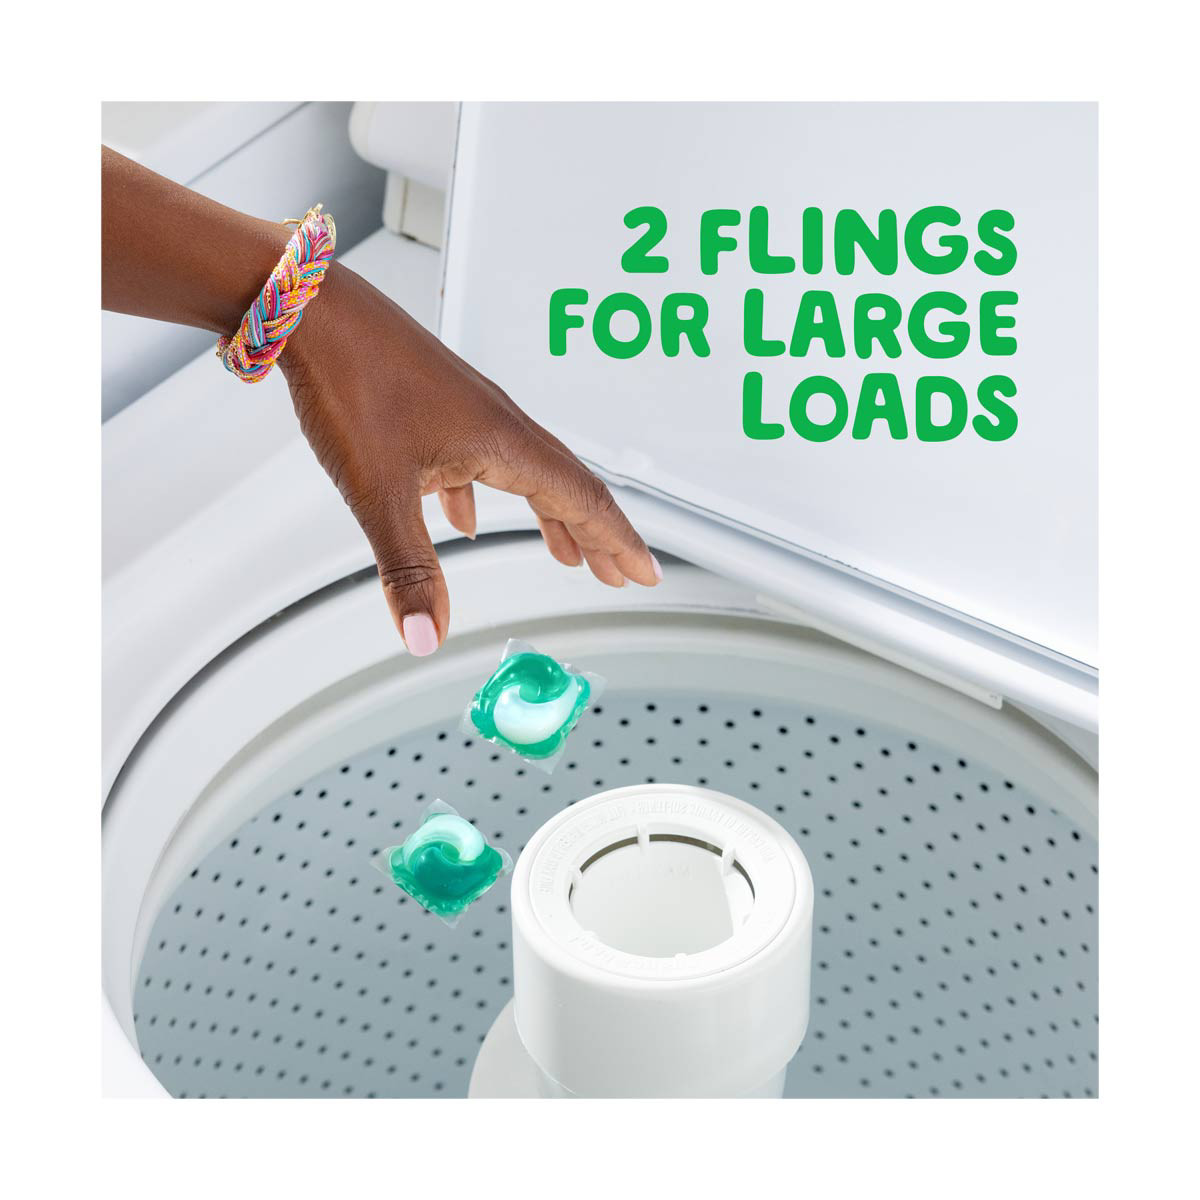 Gain flings + Ultra Oxi 3-in-1 HE Compatible Laundry Detergent Pacs - Waterfall Delight Scent, 14 ct